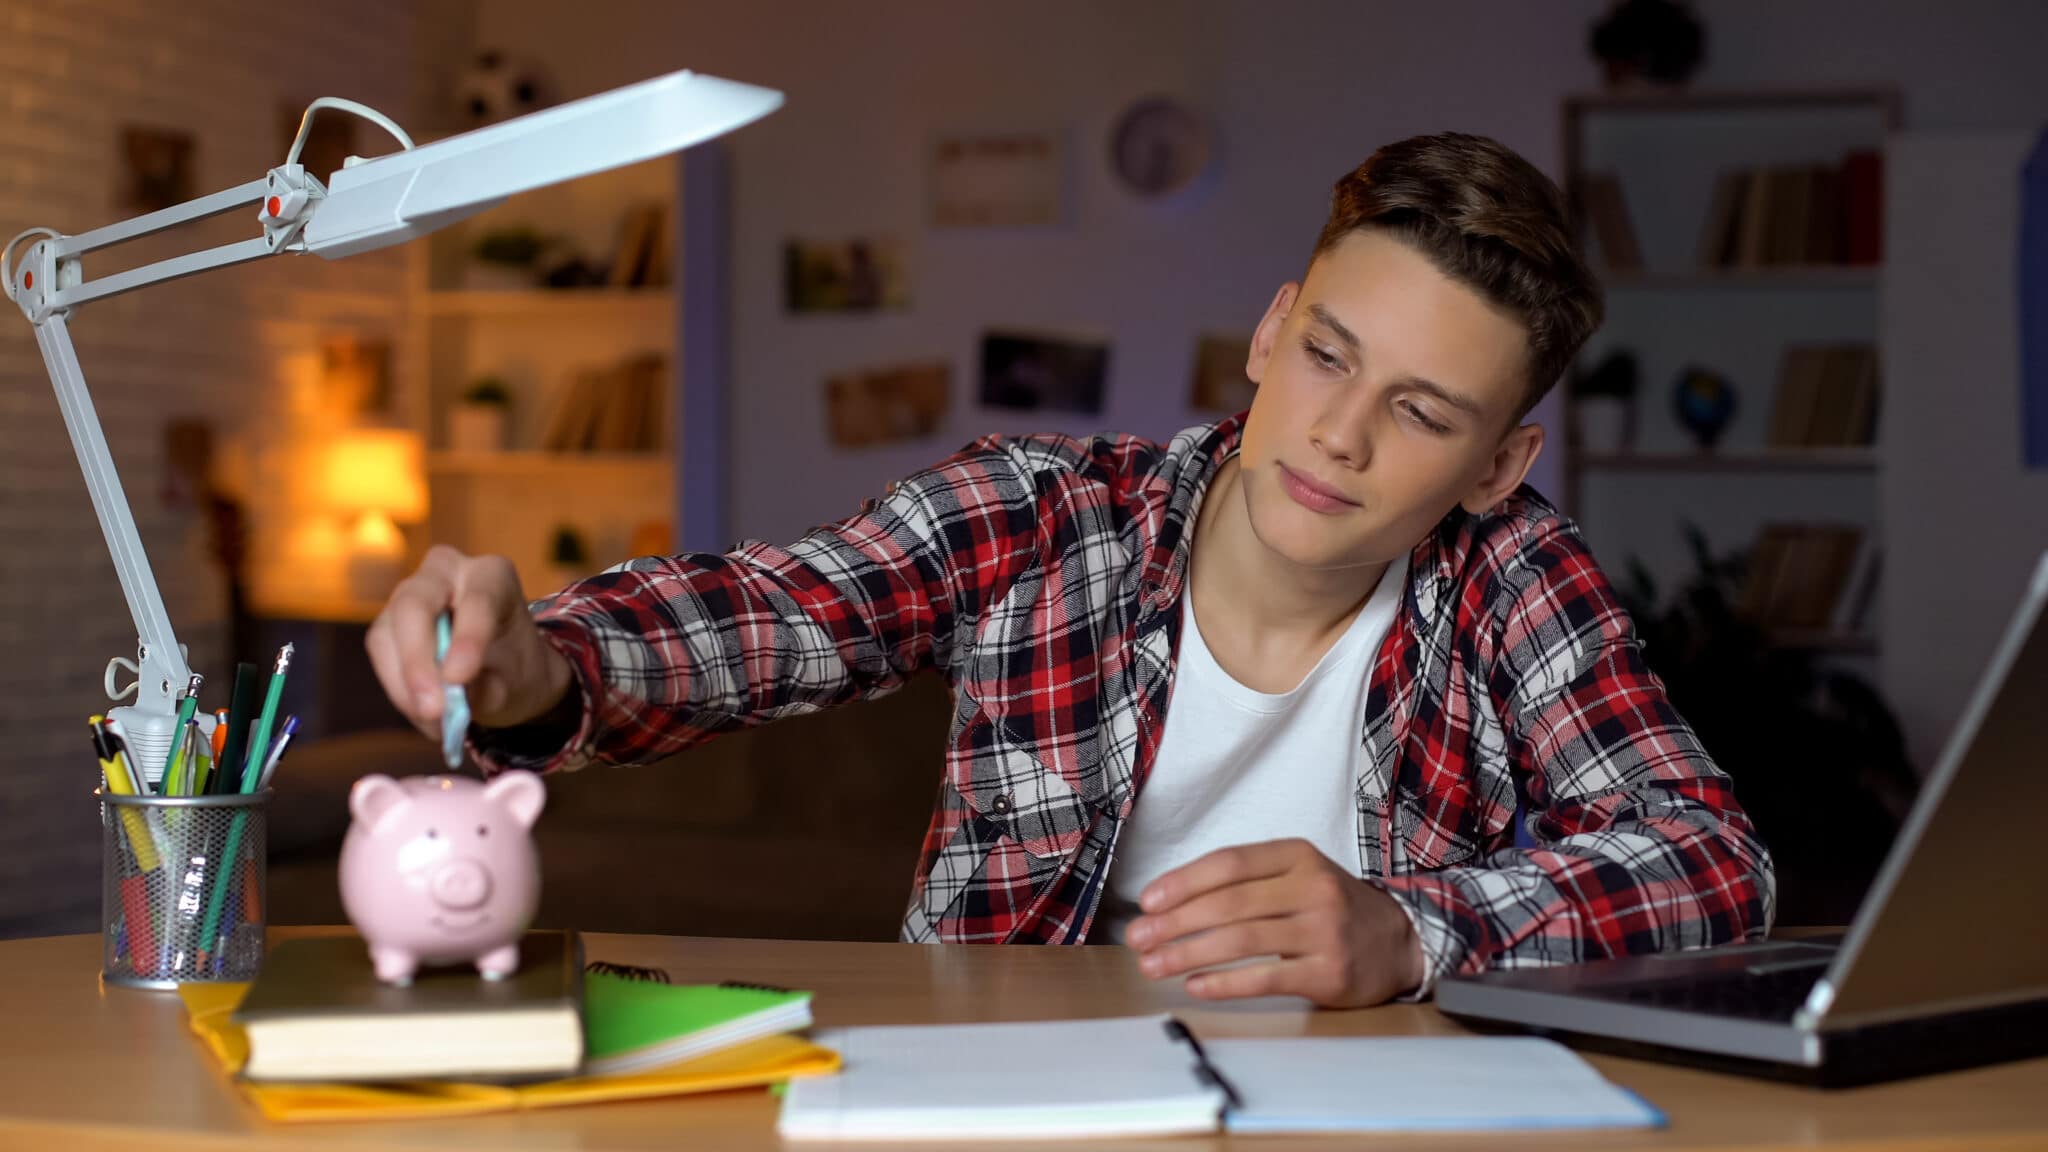 Basic financial IQ for teens now more important than ever